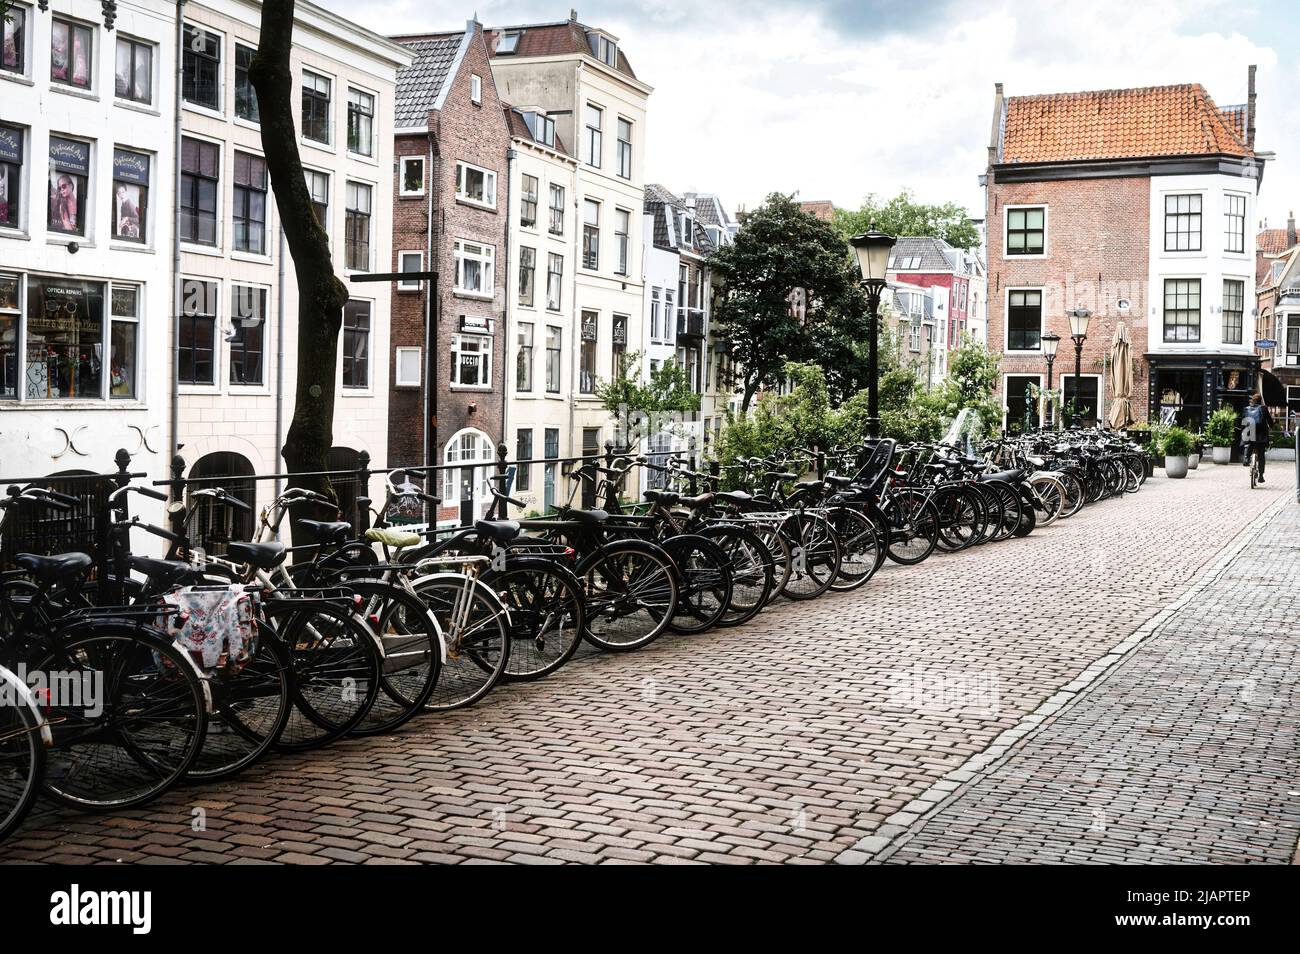 bicycle parking in the narrow streets of the old towns in the netherlands Stock Photo